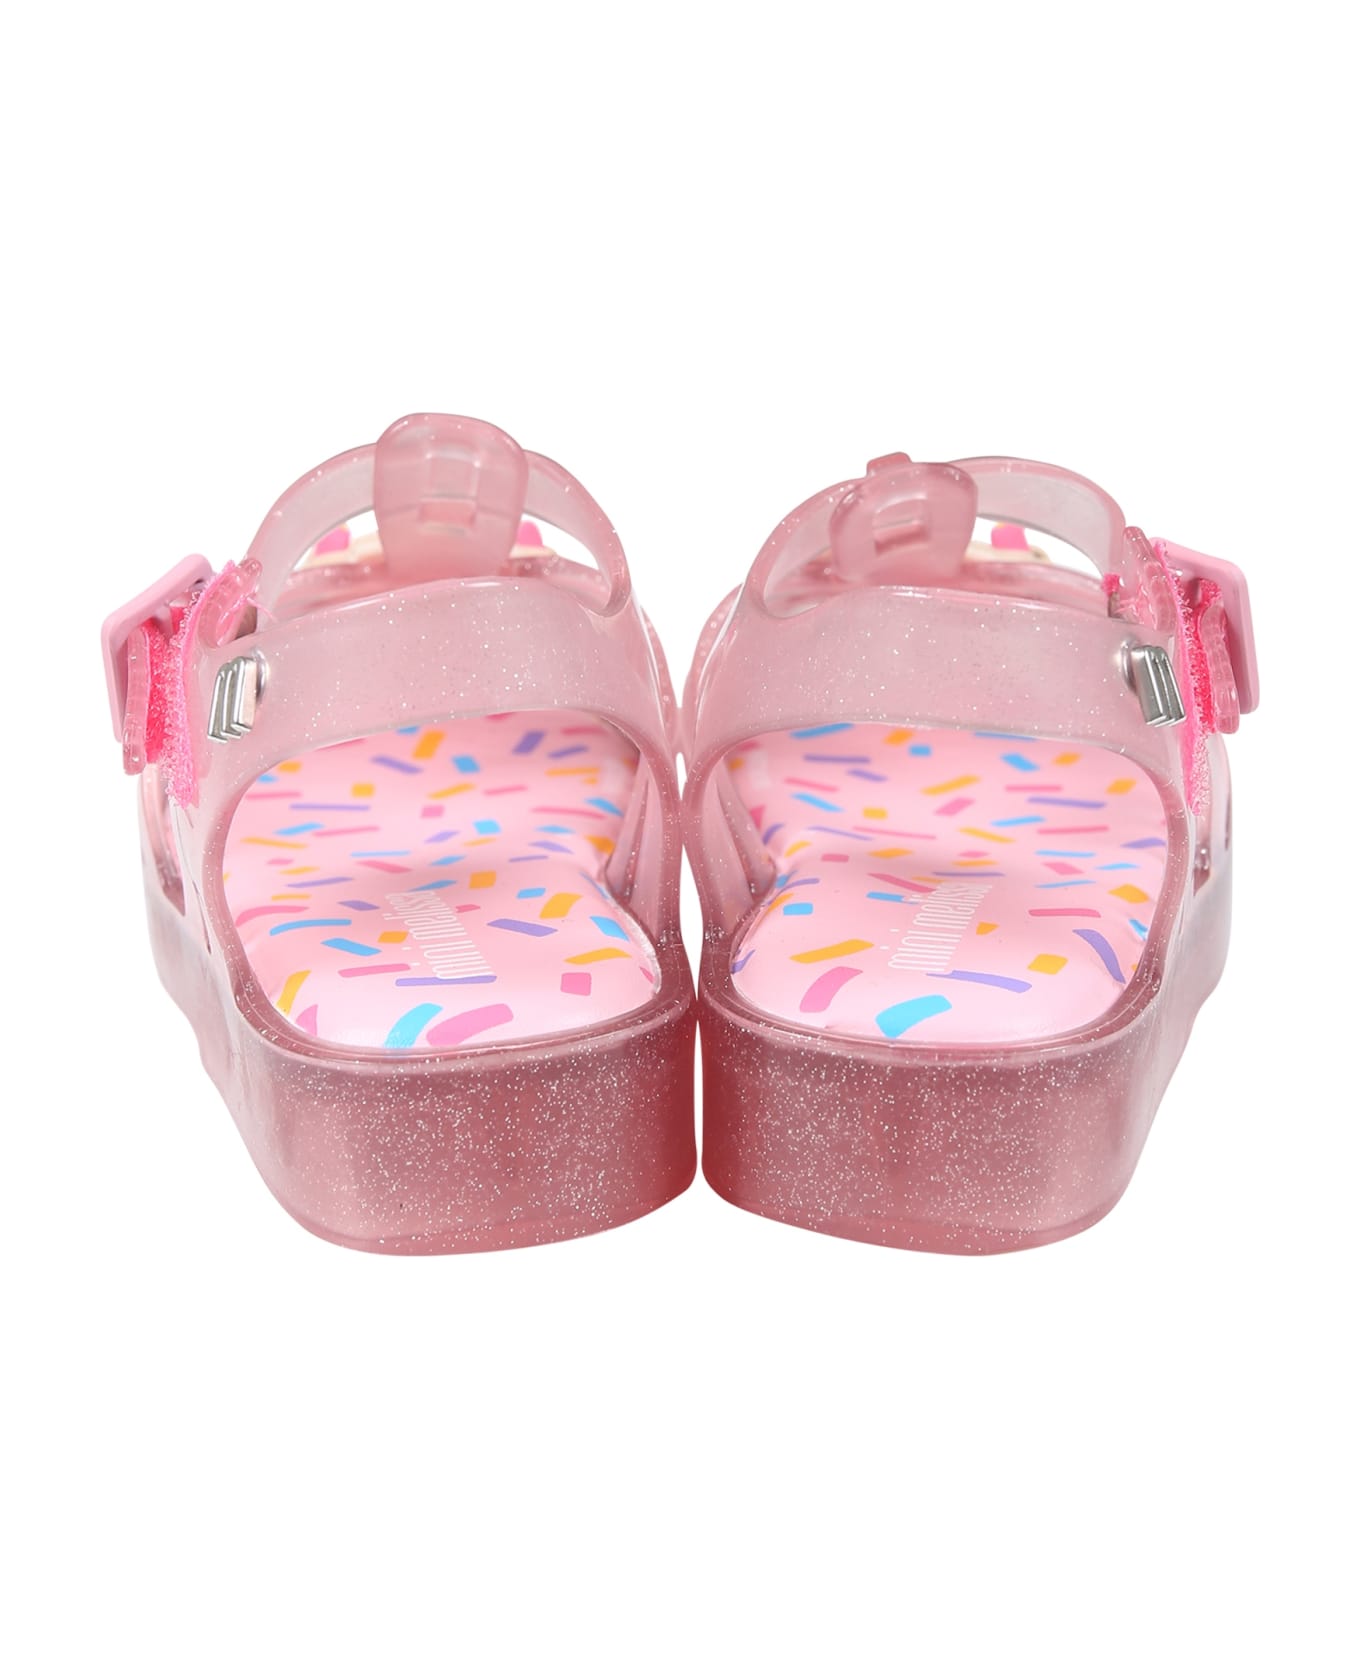 Melissa Pink Sandals For Girl With Cupcake - Pink